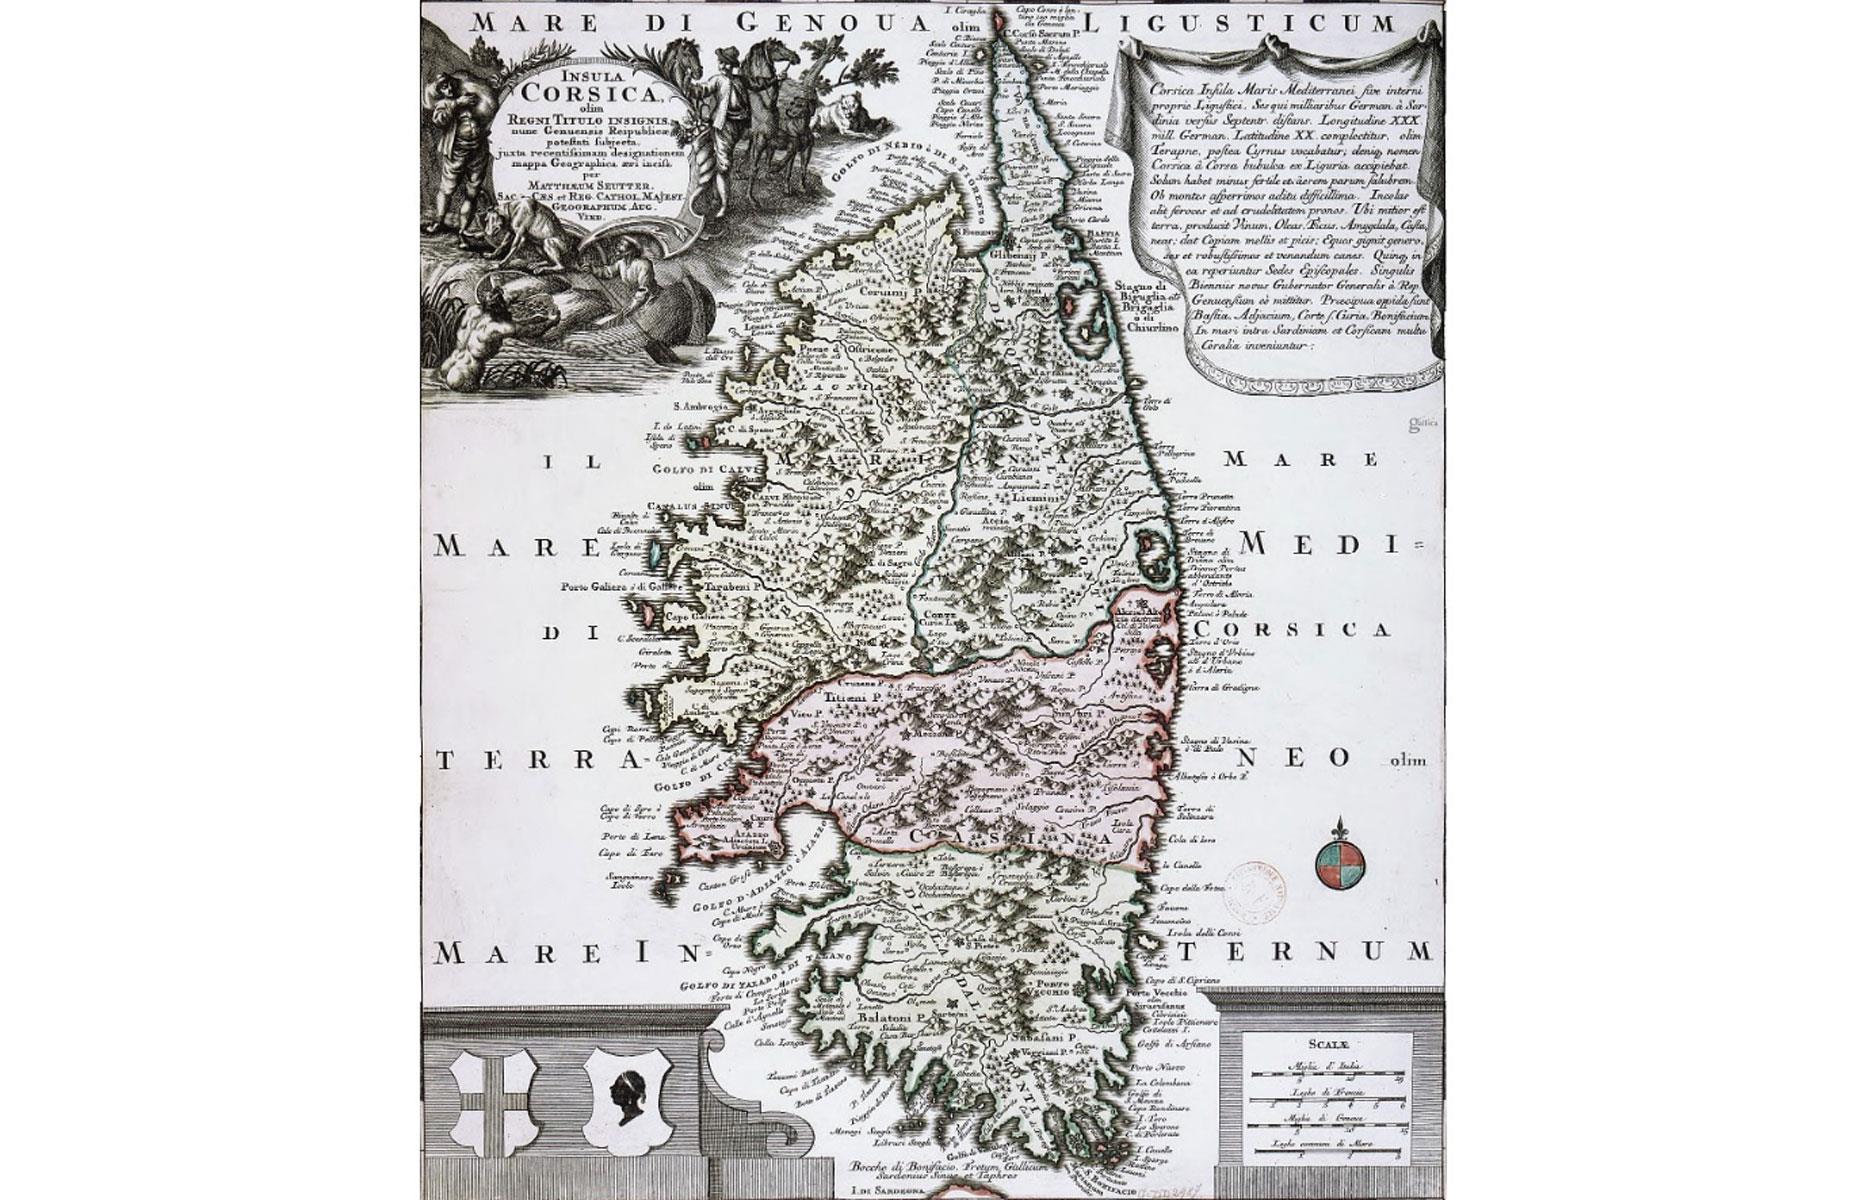 France's purchase of Corsica from the Republic of Genoa, 1768